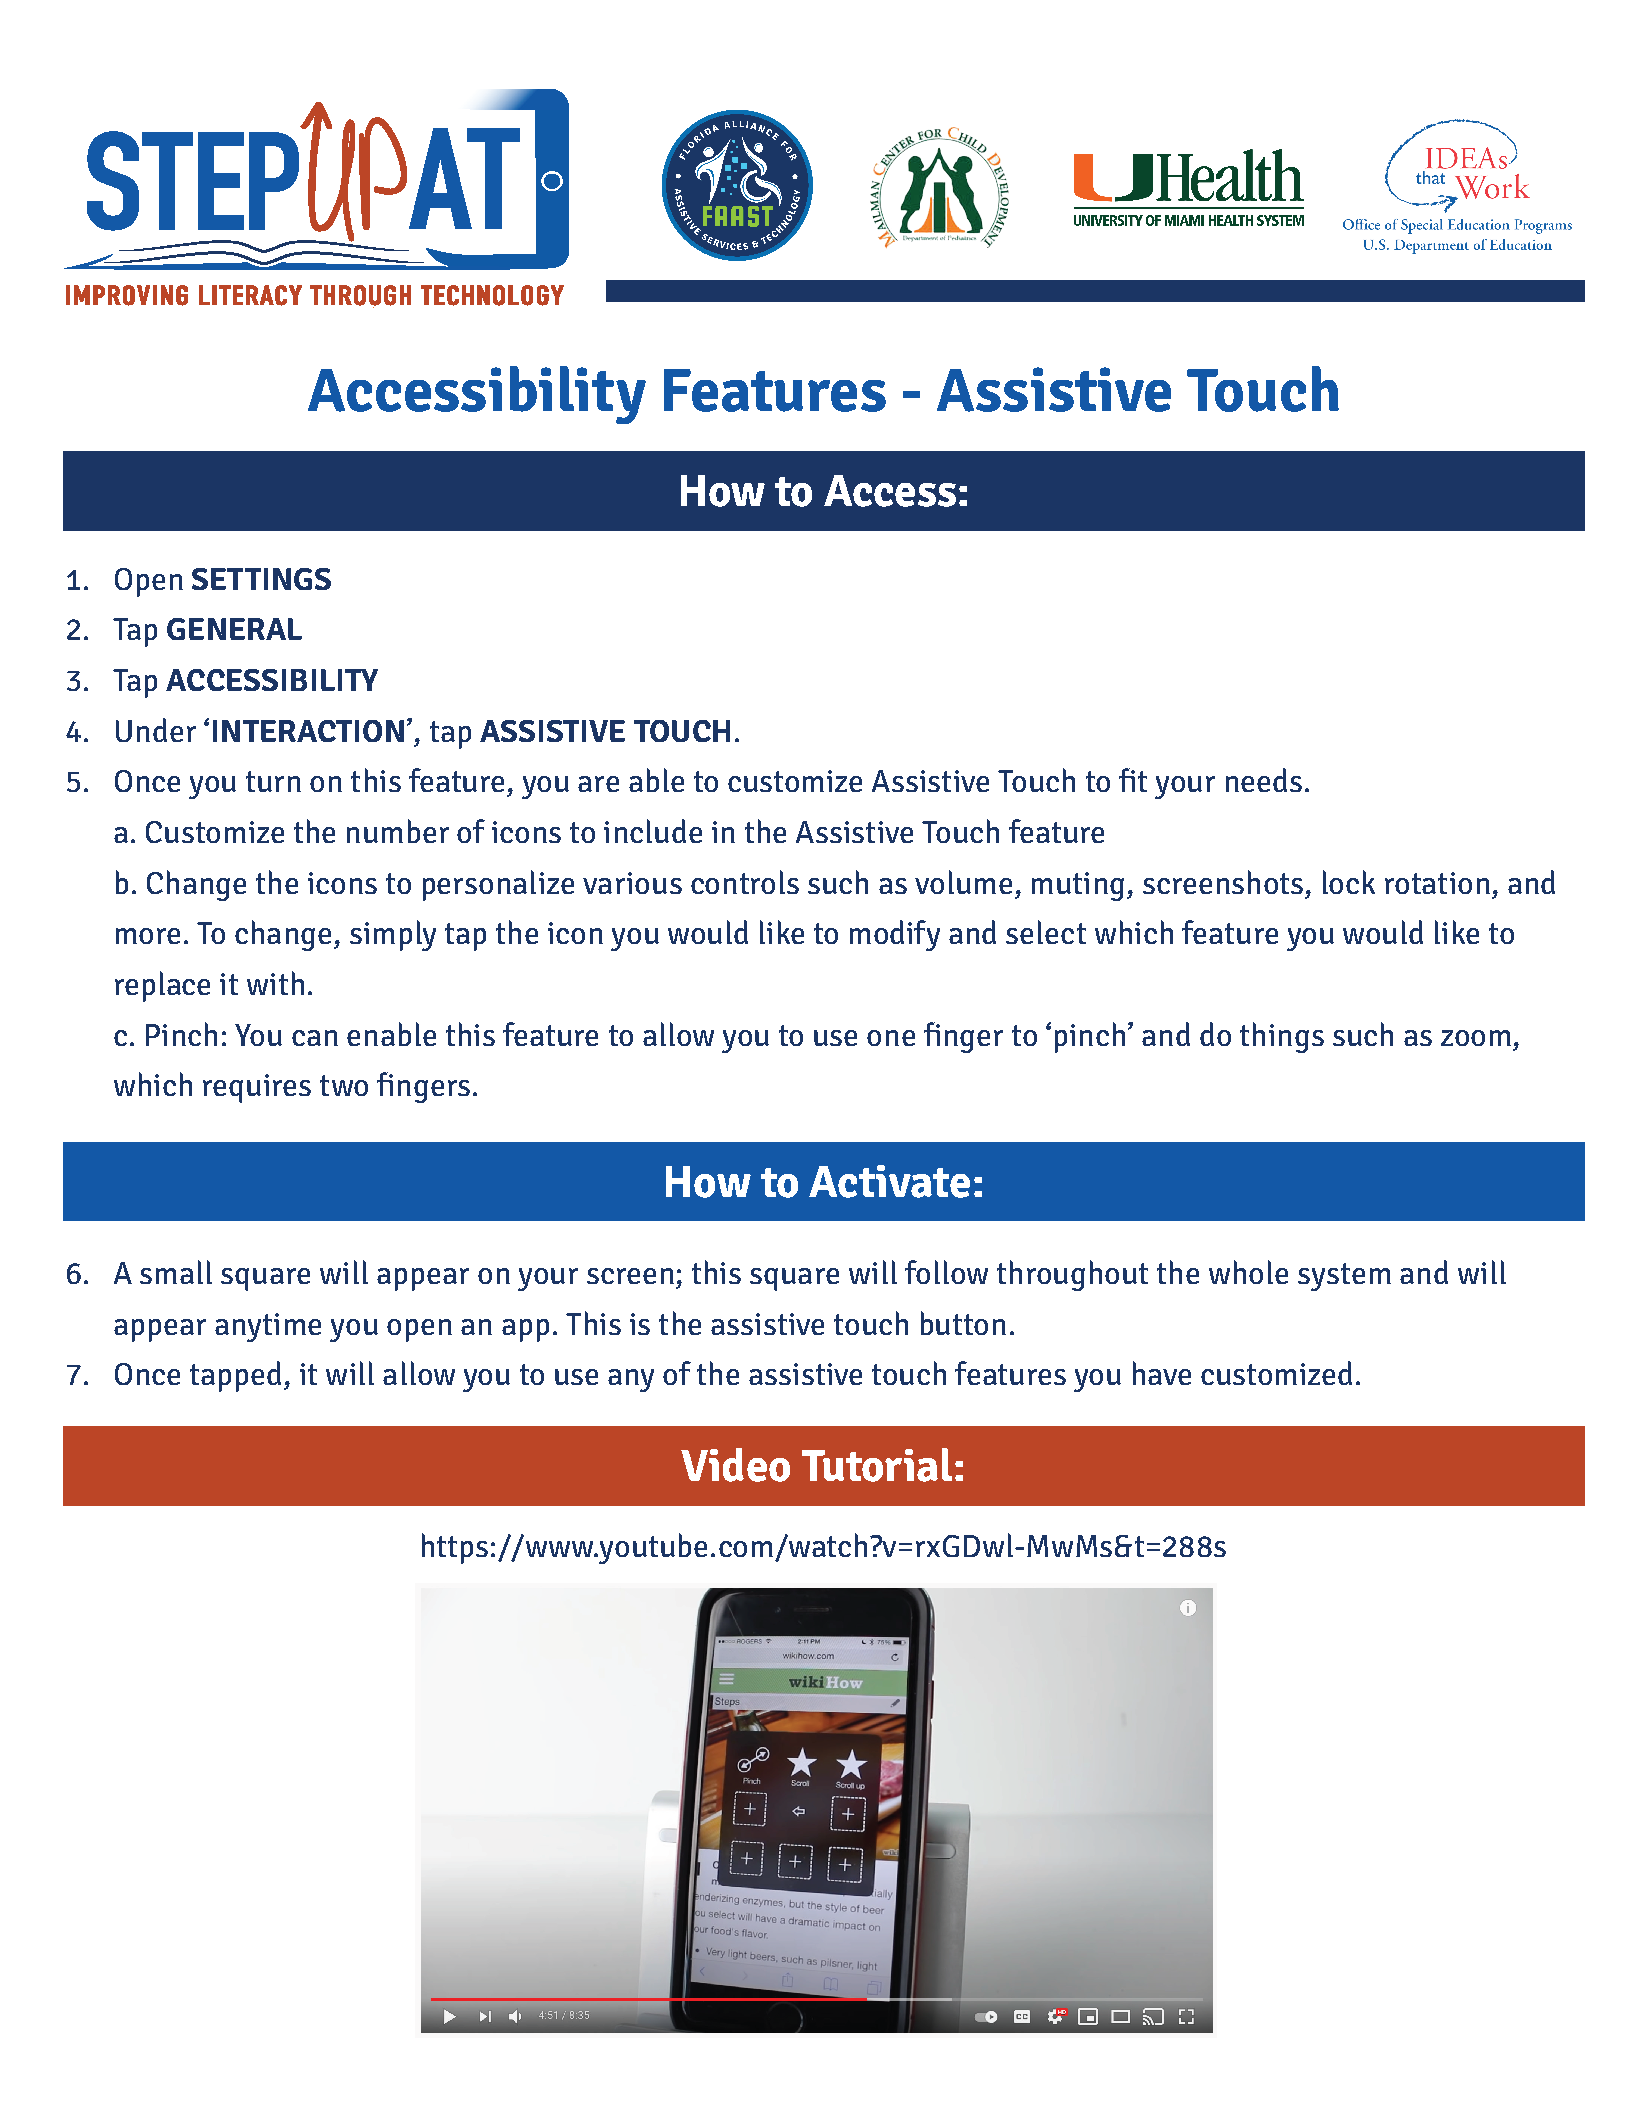 iOS Accessibility and Assistive Touch instructions in English